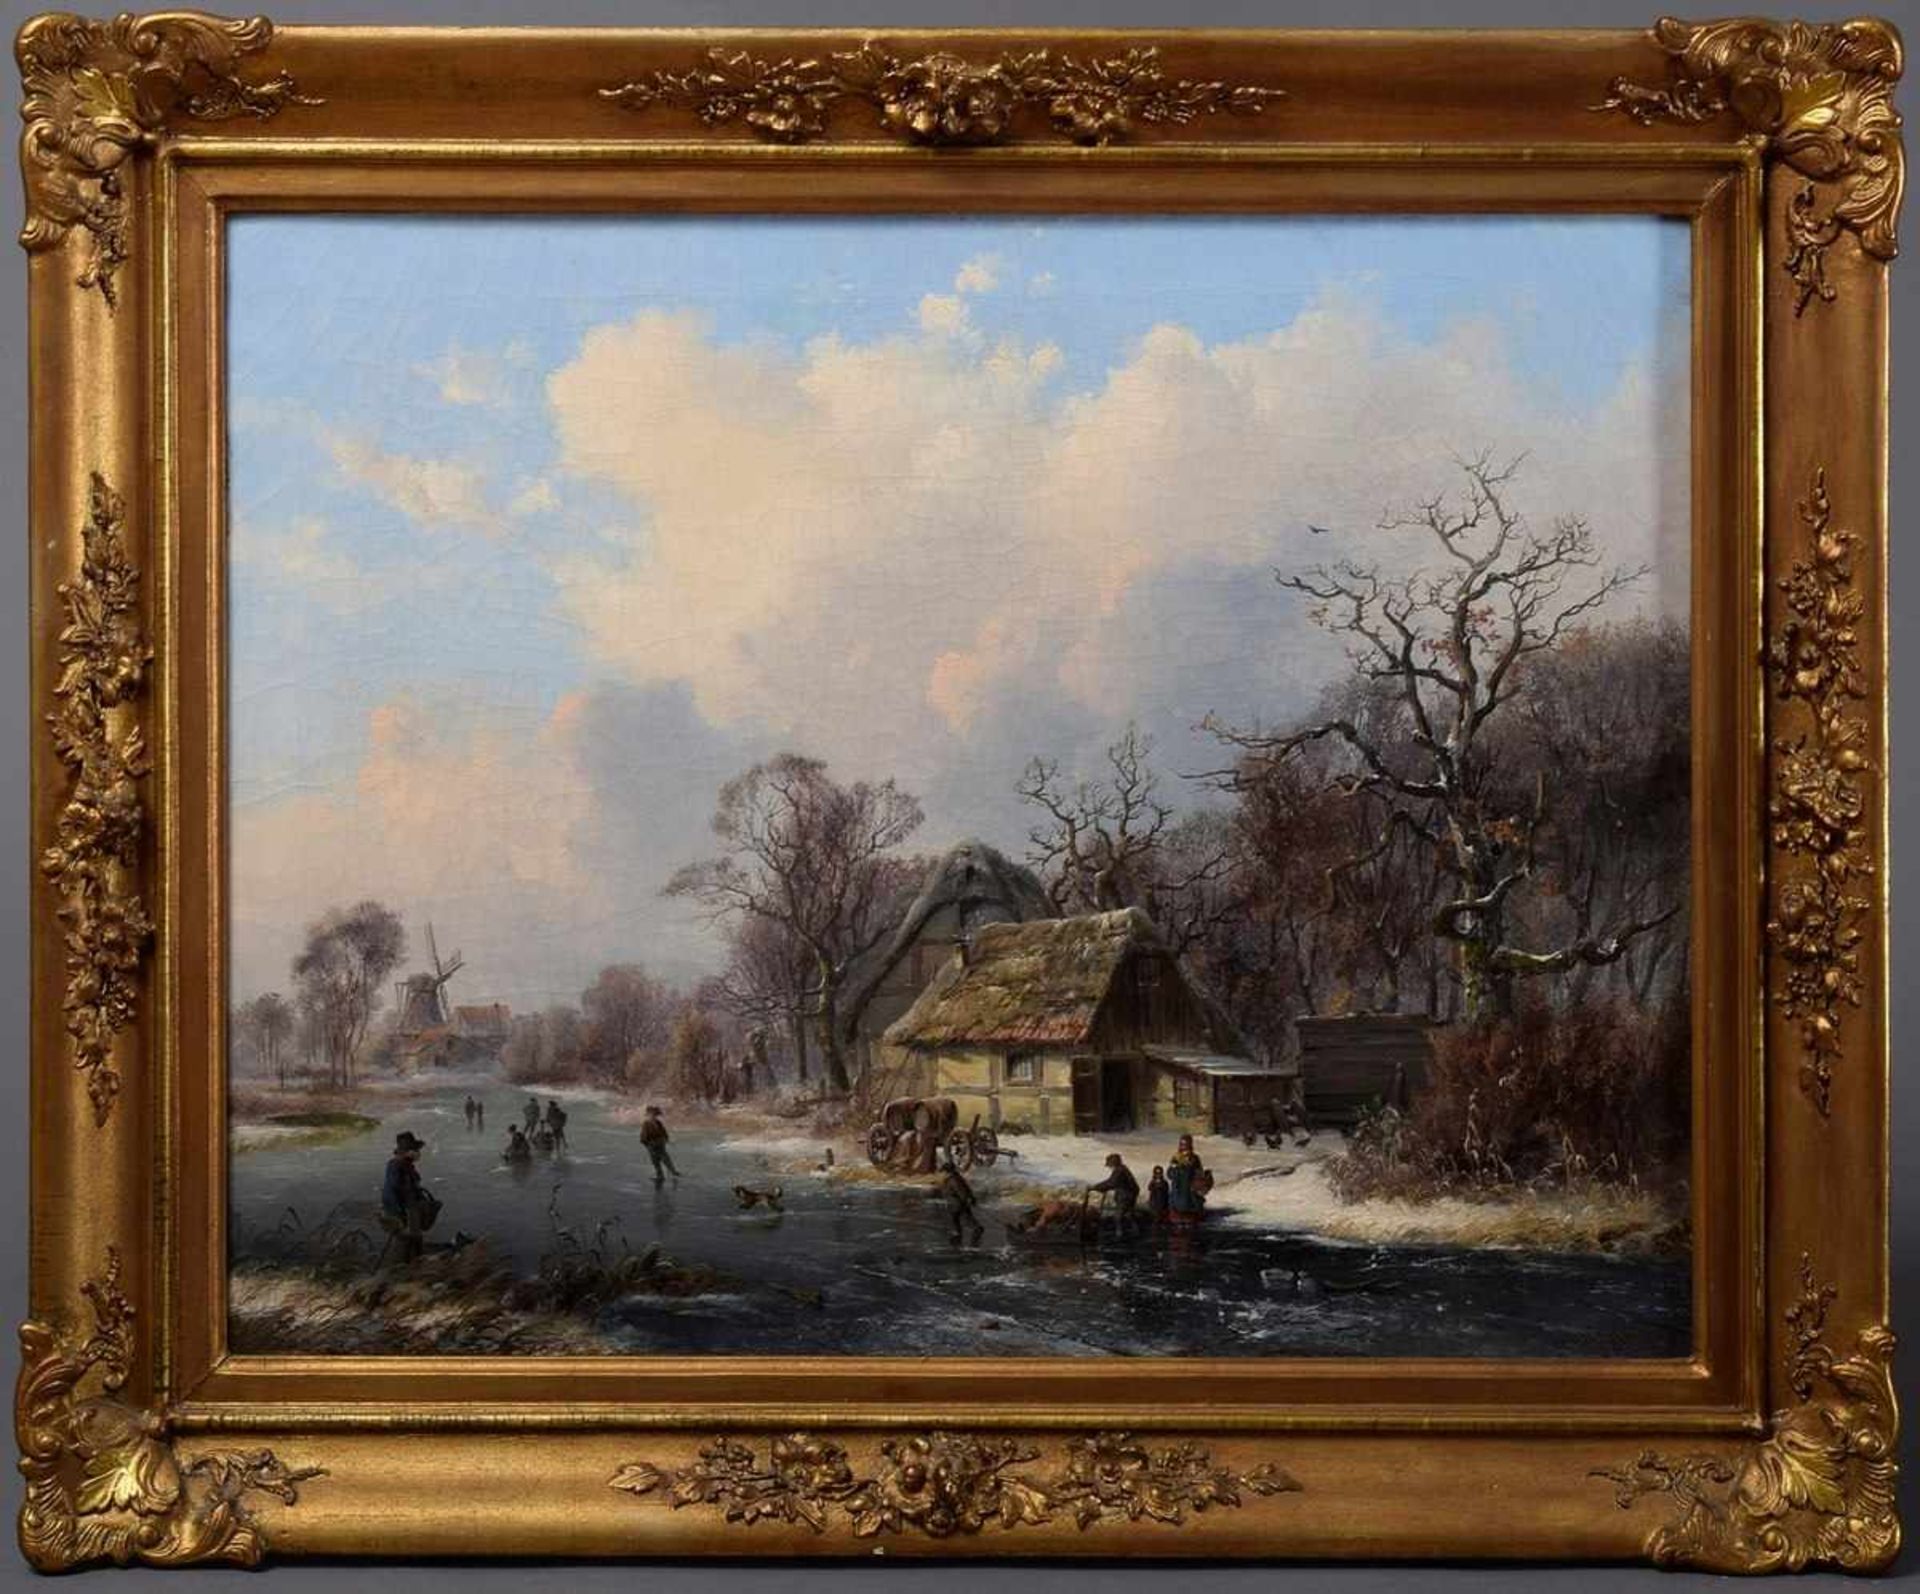 Köster, Carl Georg (1812-1893) "Winter landscape with ice skaters", oil/canvas, signed lower - Image 2 of 7